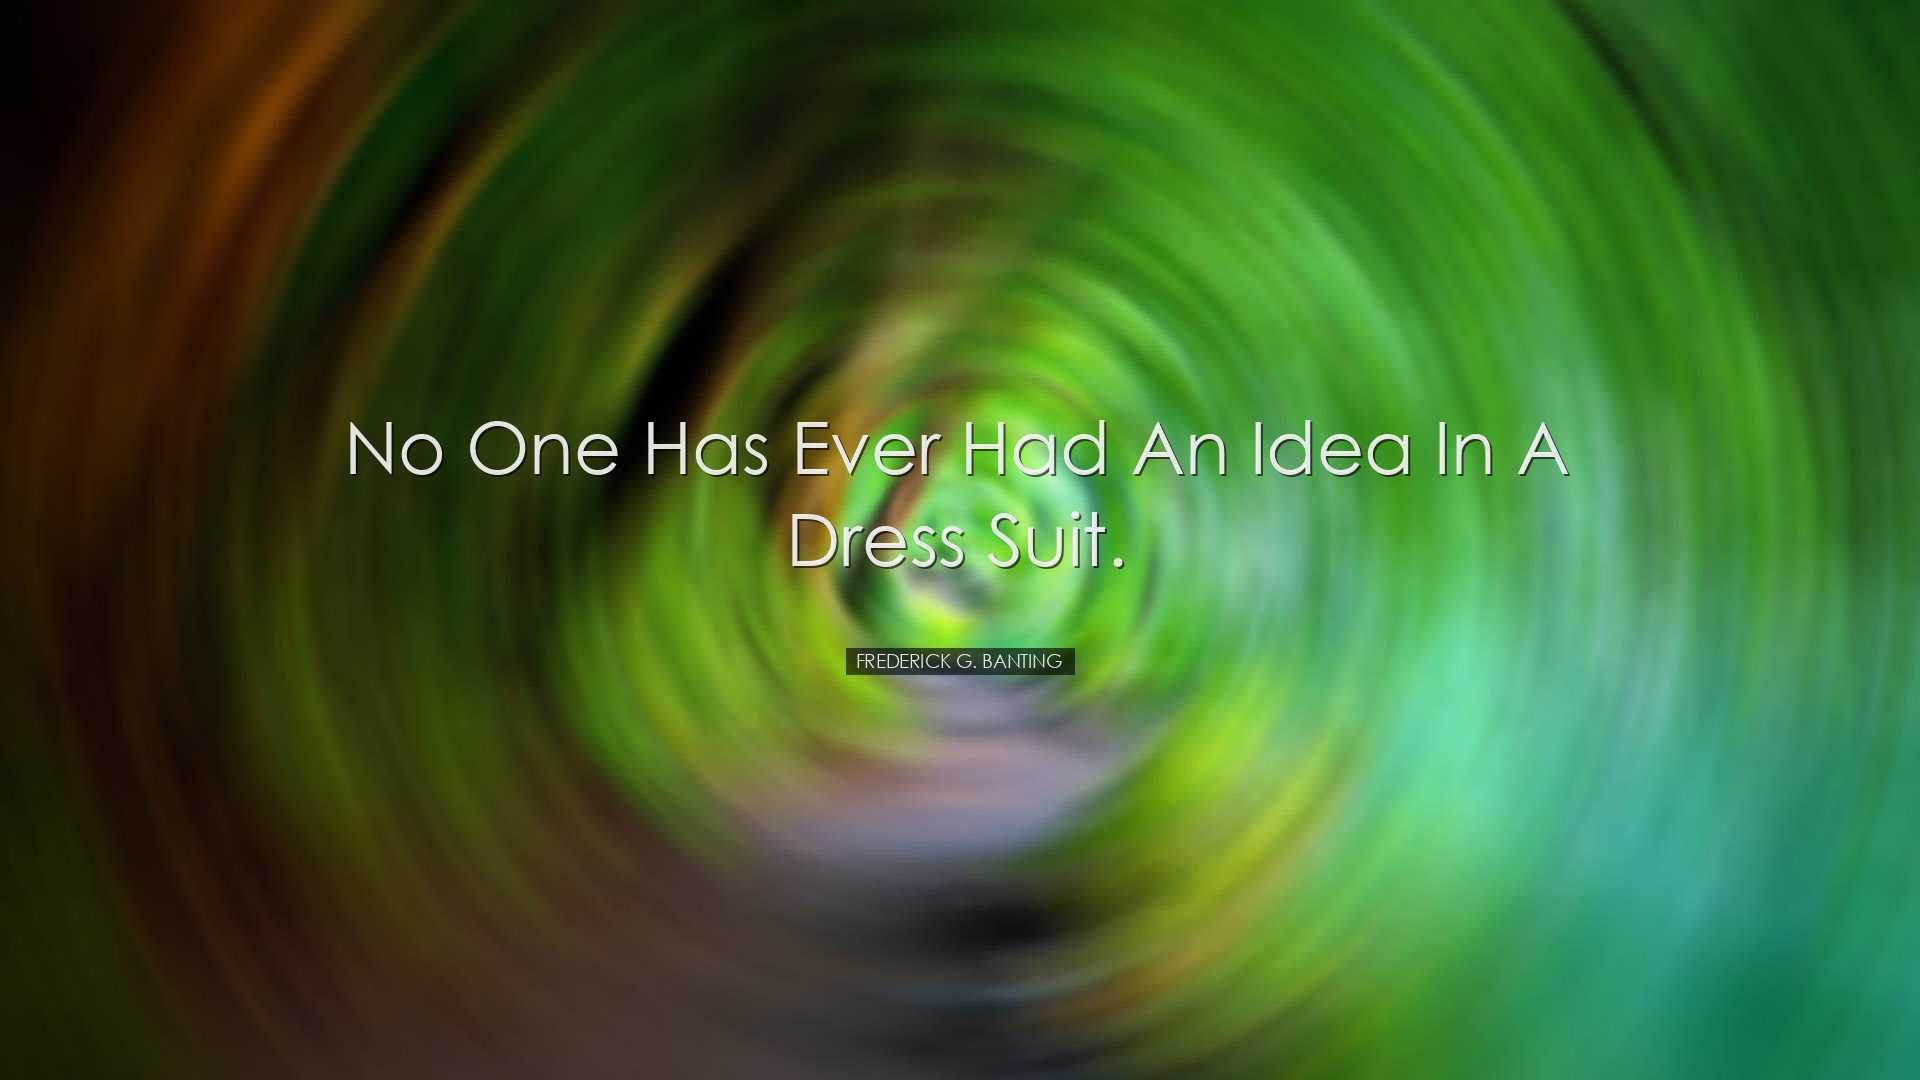 No one has ever had an idea in a dress suit. - Frederick G. Bantin